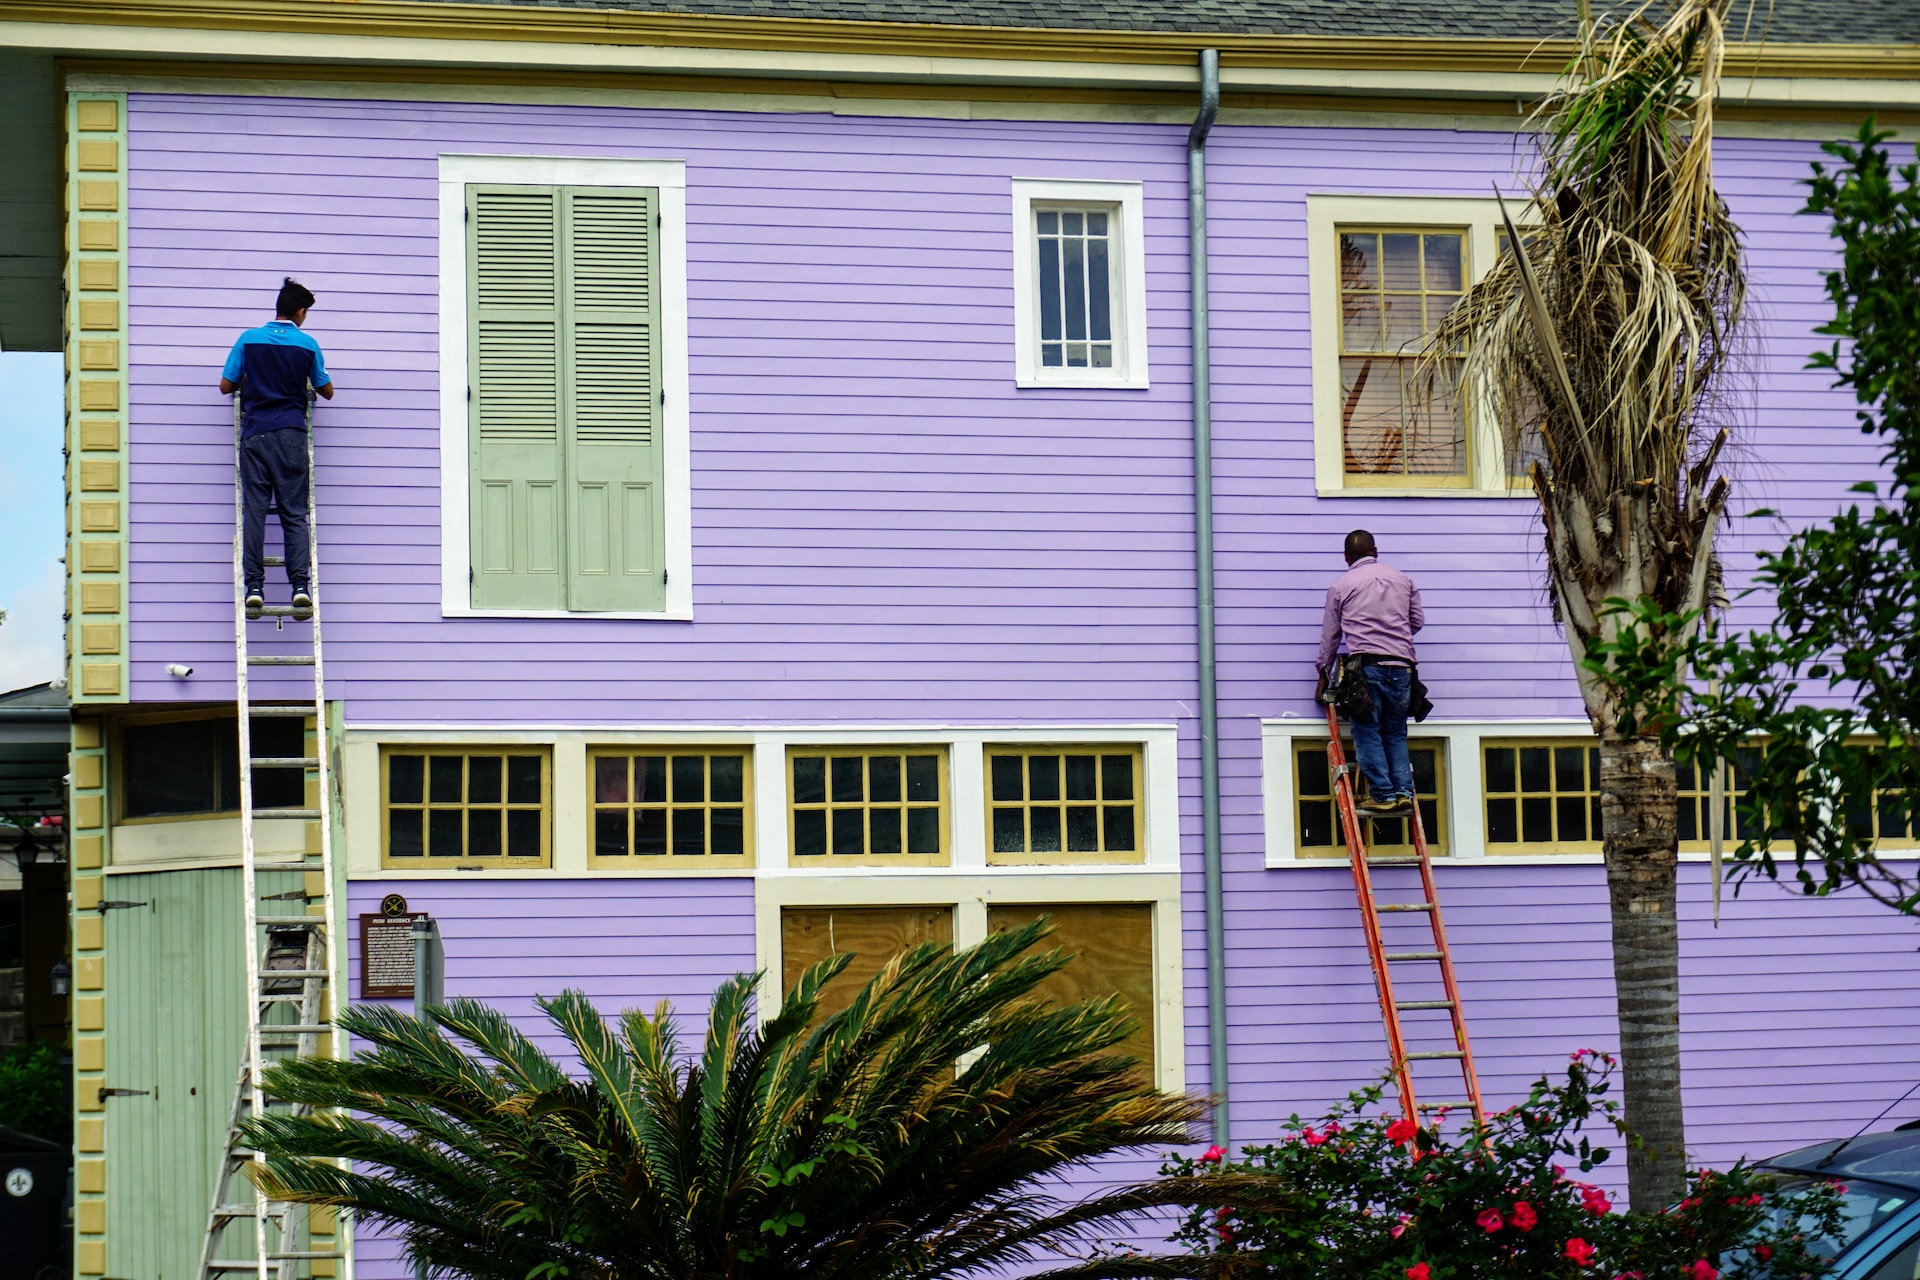 This image shows contractors helping to install purple siding on a home in Fuquay-Varina, NC.